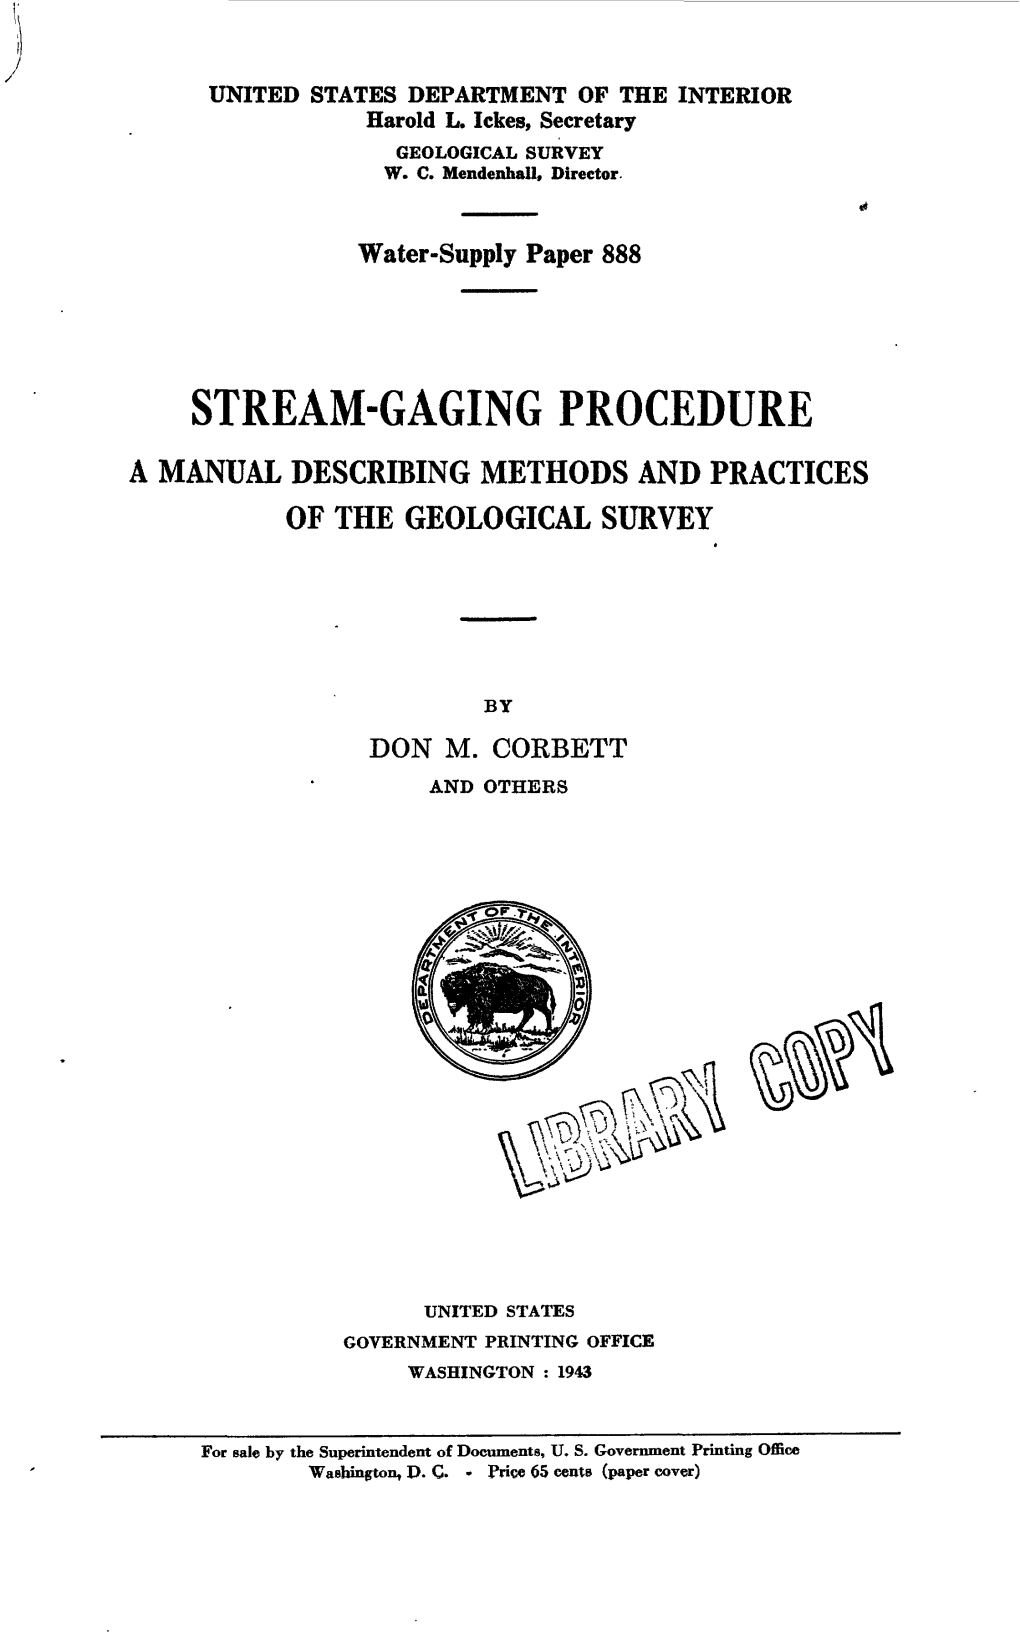 Stream-Gaging Procedure a Manual Describing Methods and Practices of the Geological Survey